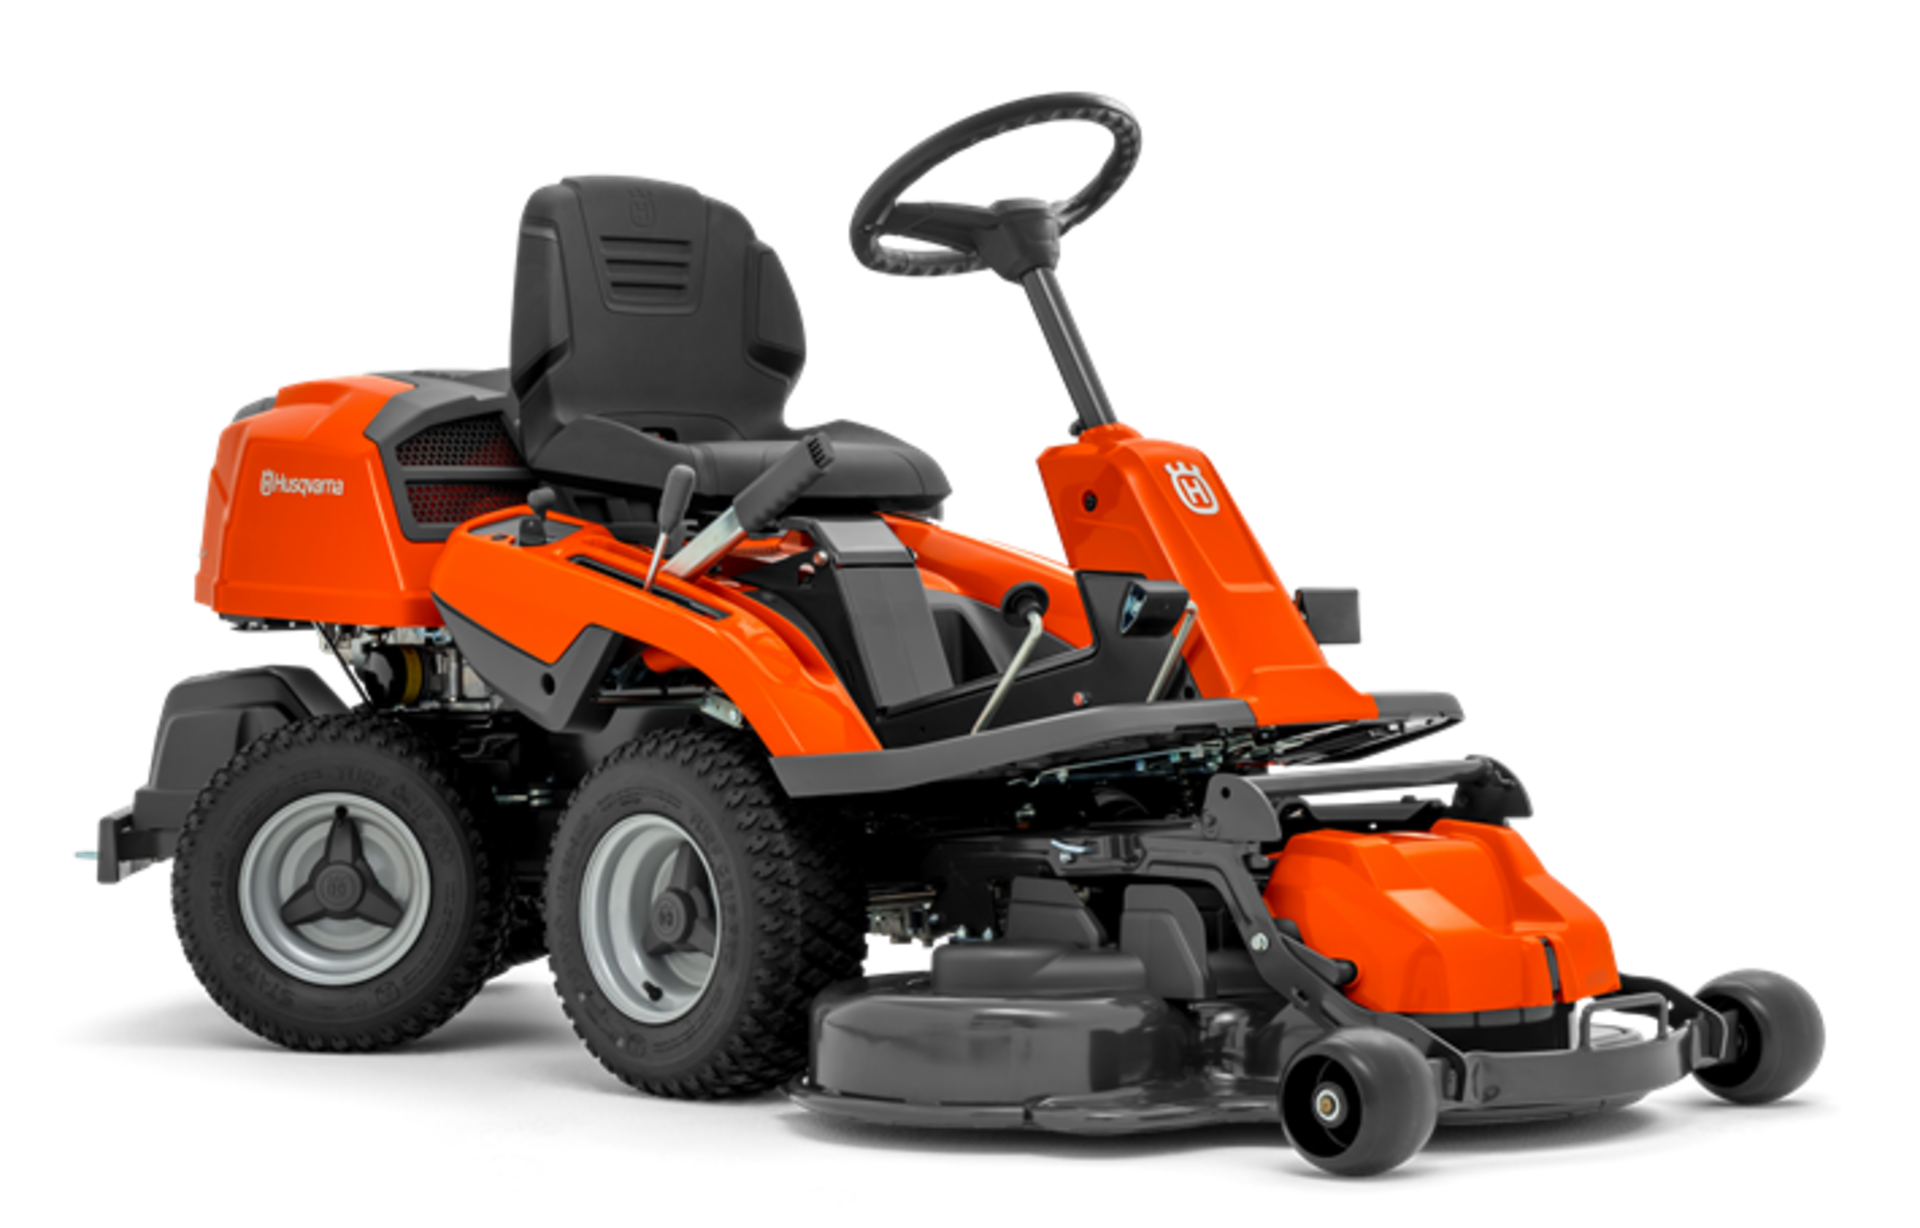 2020 BRAND NEW HUSQVARNA R 213C ROTARY RIDE ON LAWN MOWER (REAR DISCHARGE) NO COLLECTOR *PLUS VAT*